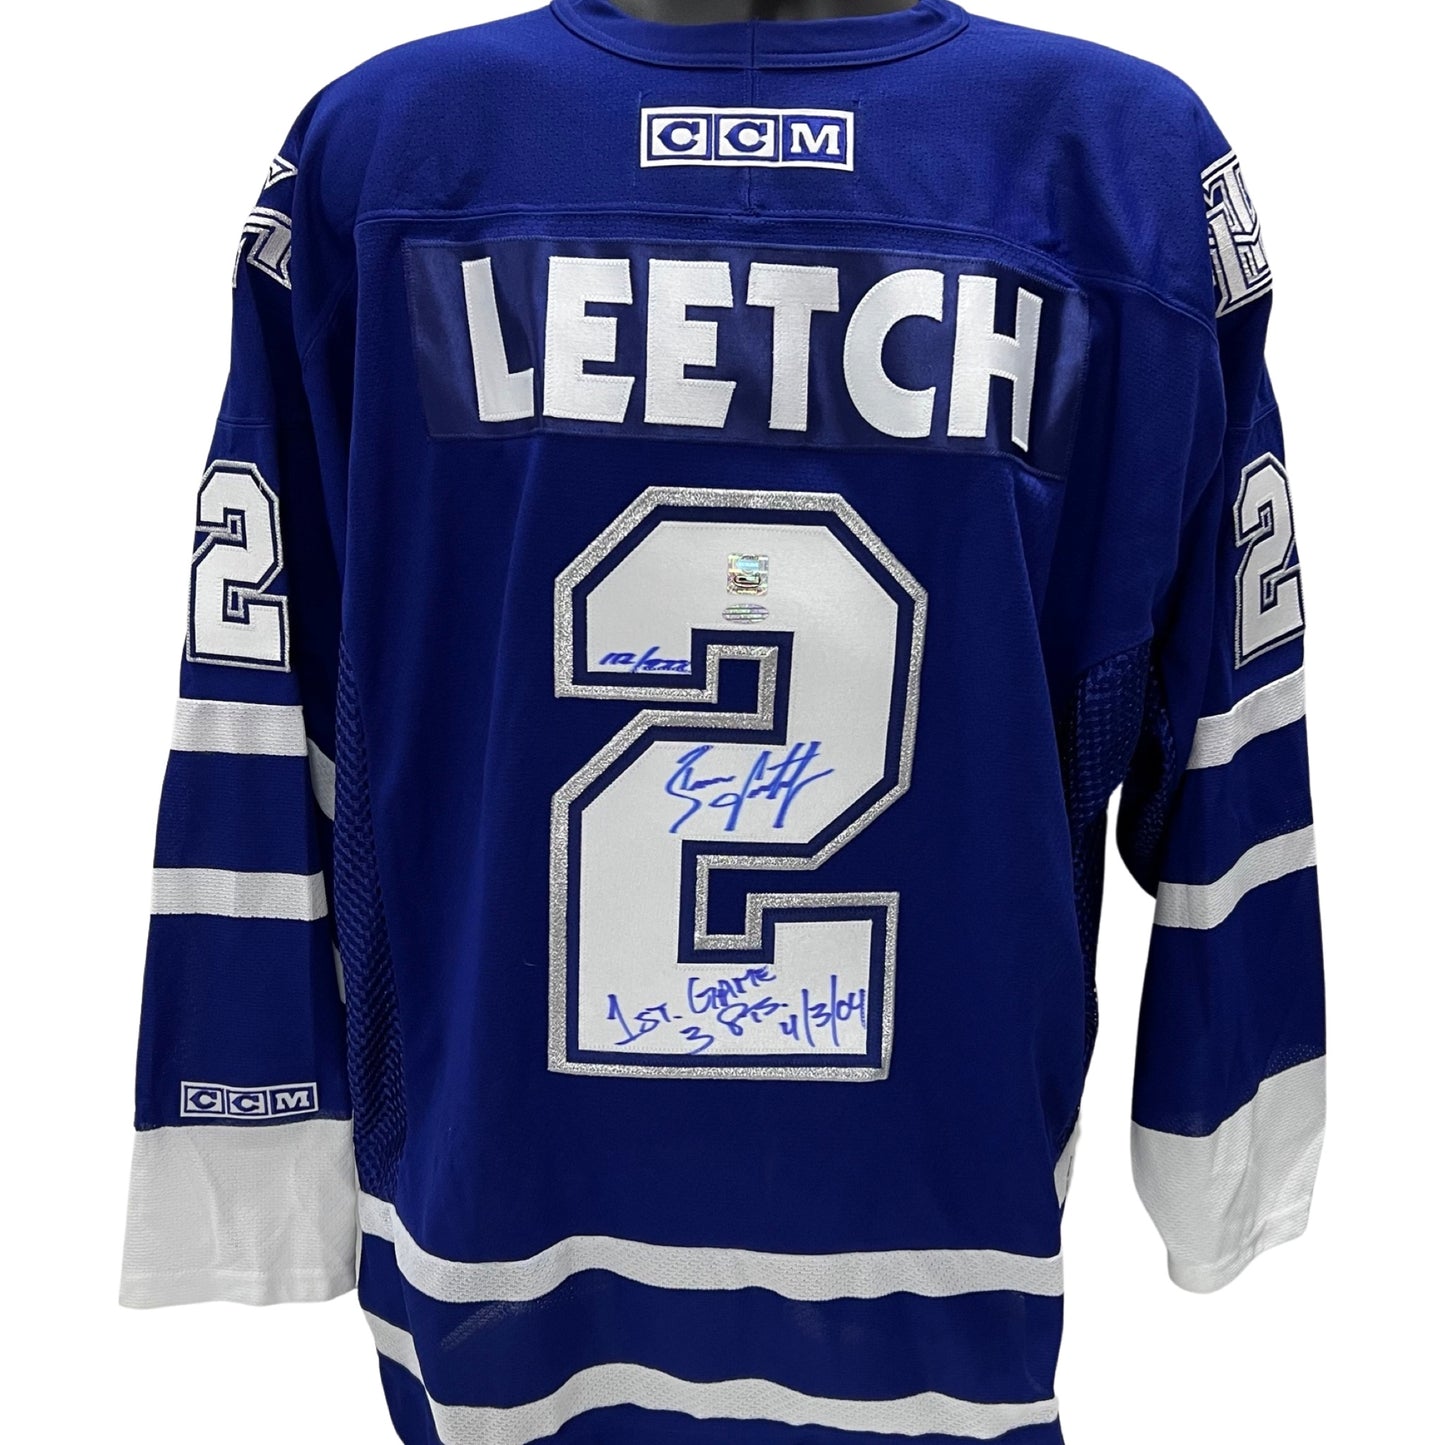 Brian Leetch Autographed Toronto Maple Leafs CCM Jersey “1st Game 3 Pts 4/3/04” Inscription Steiner